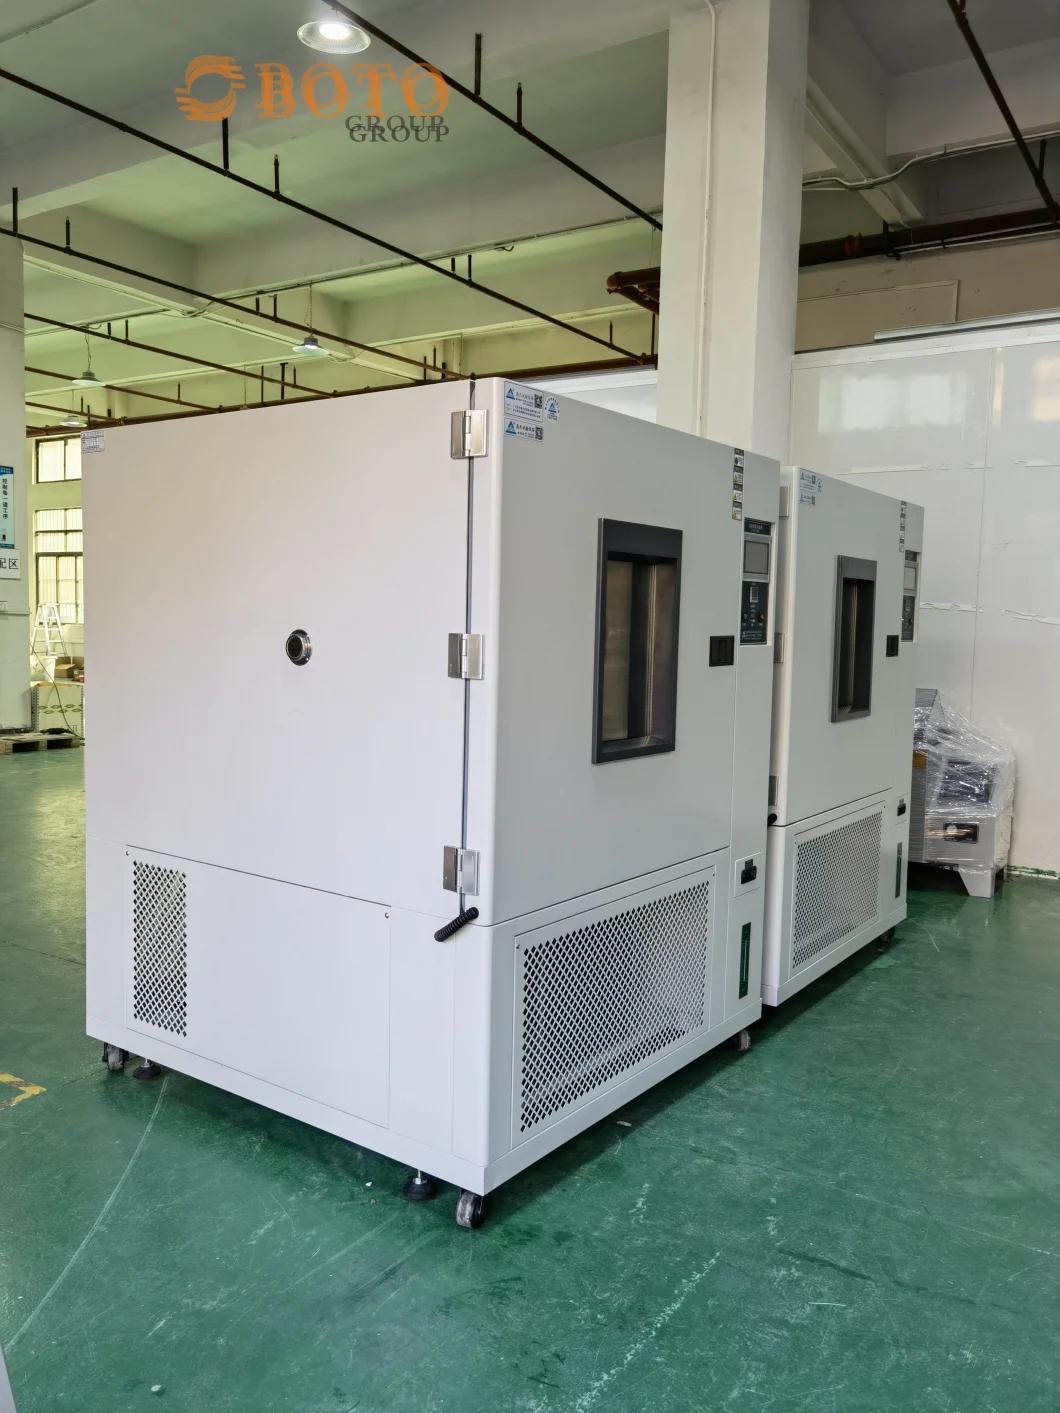 High Precision Programmable Constant High Low Temperature Test Chamber